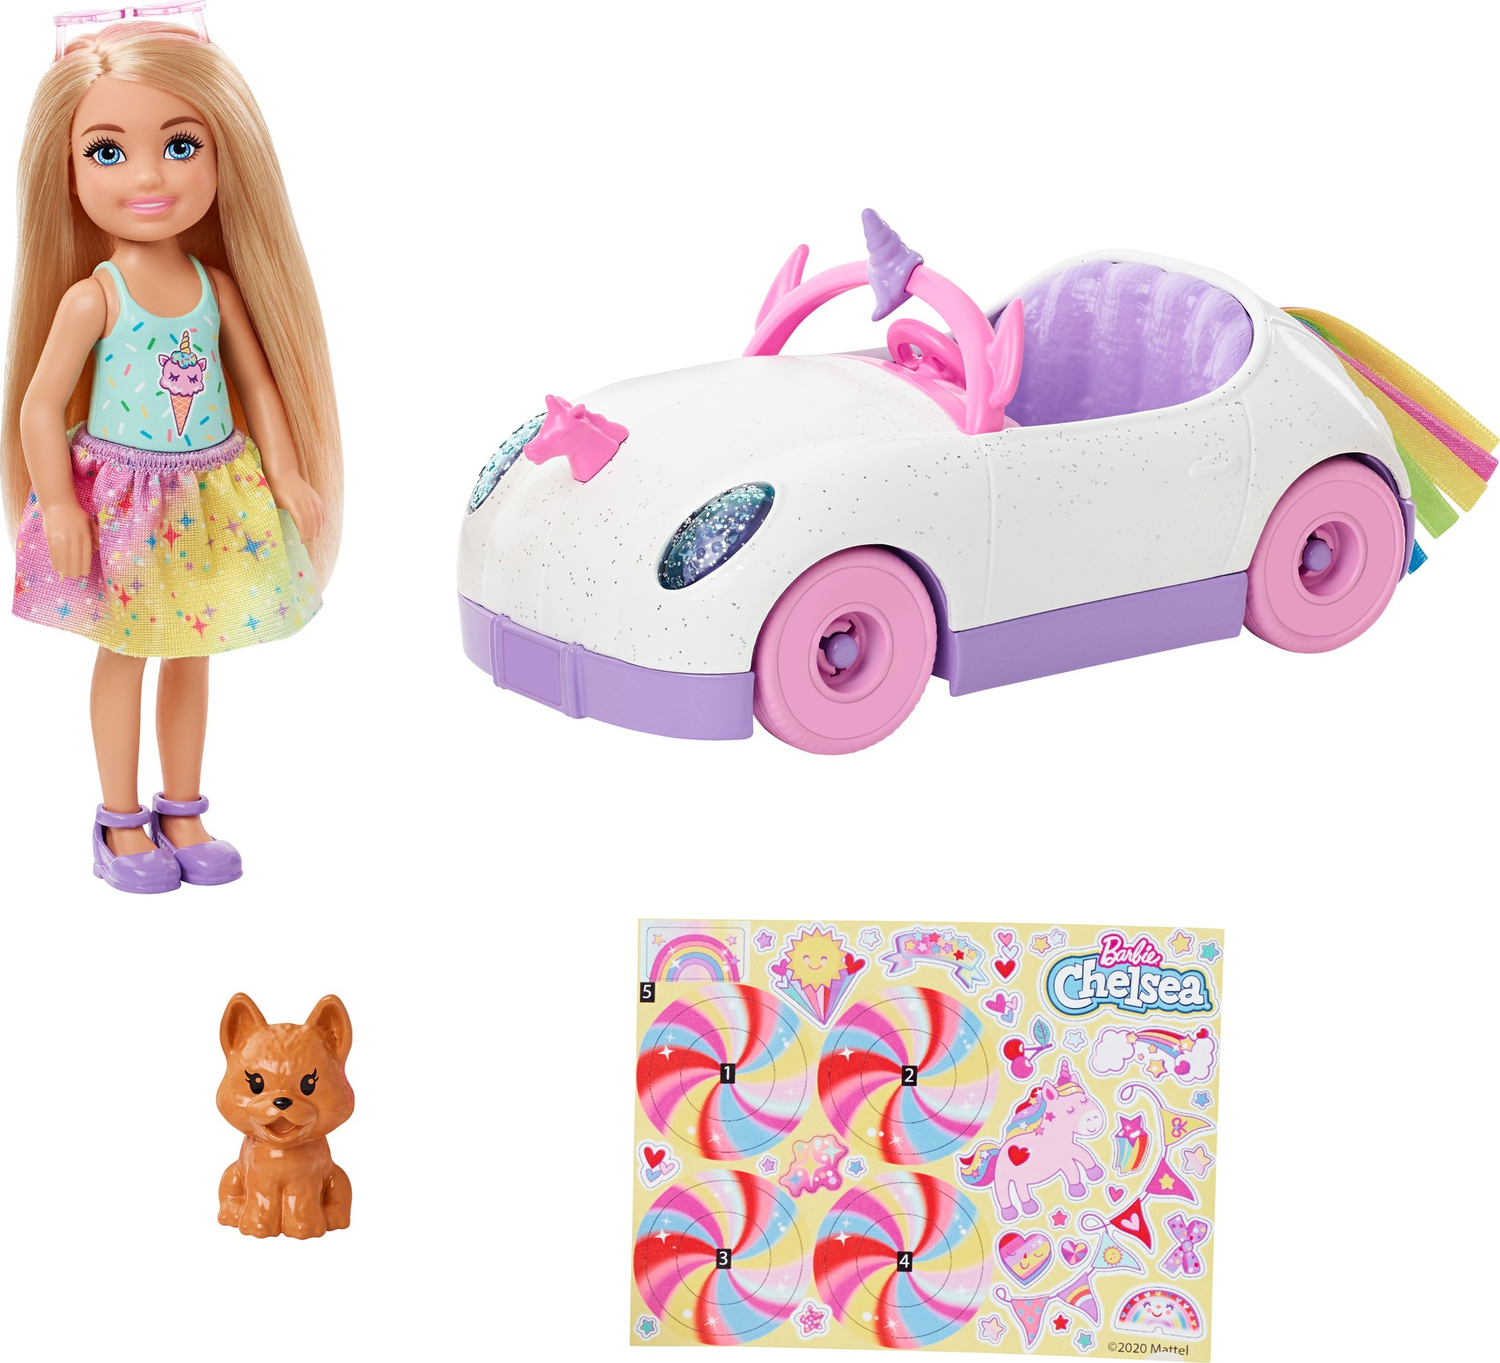 Barbie Chelsea Doll And Playset - The Toy Box Hanover